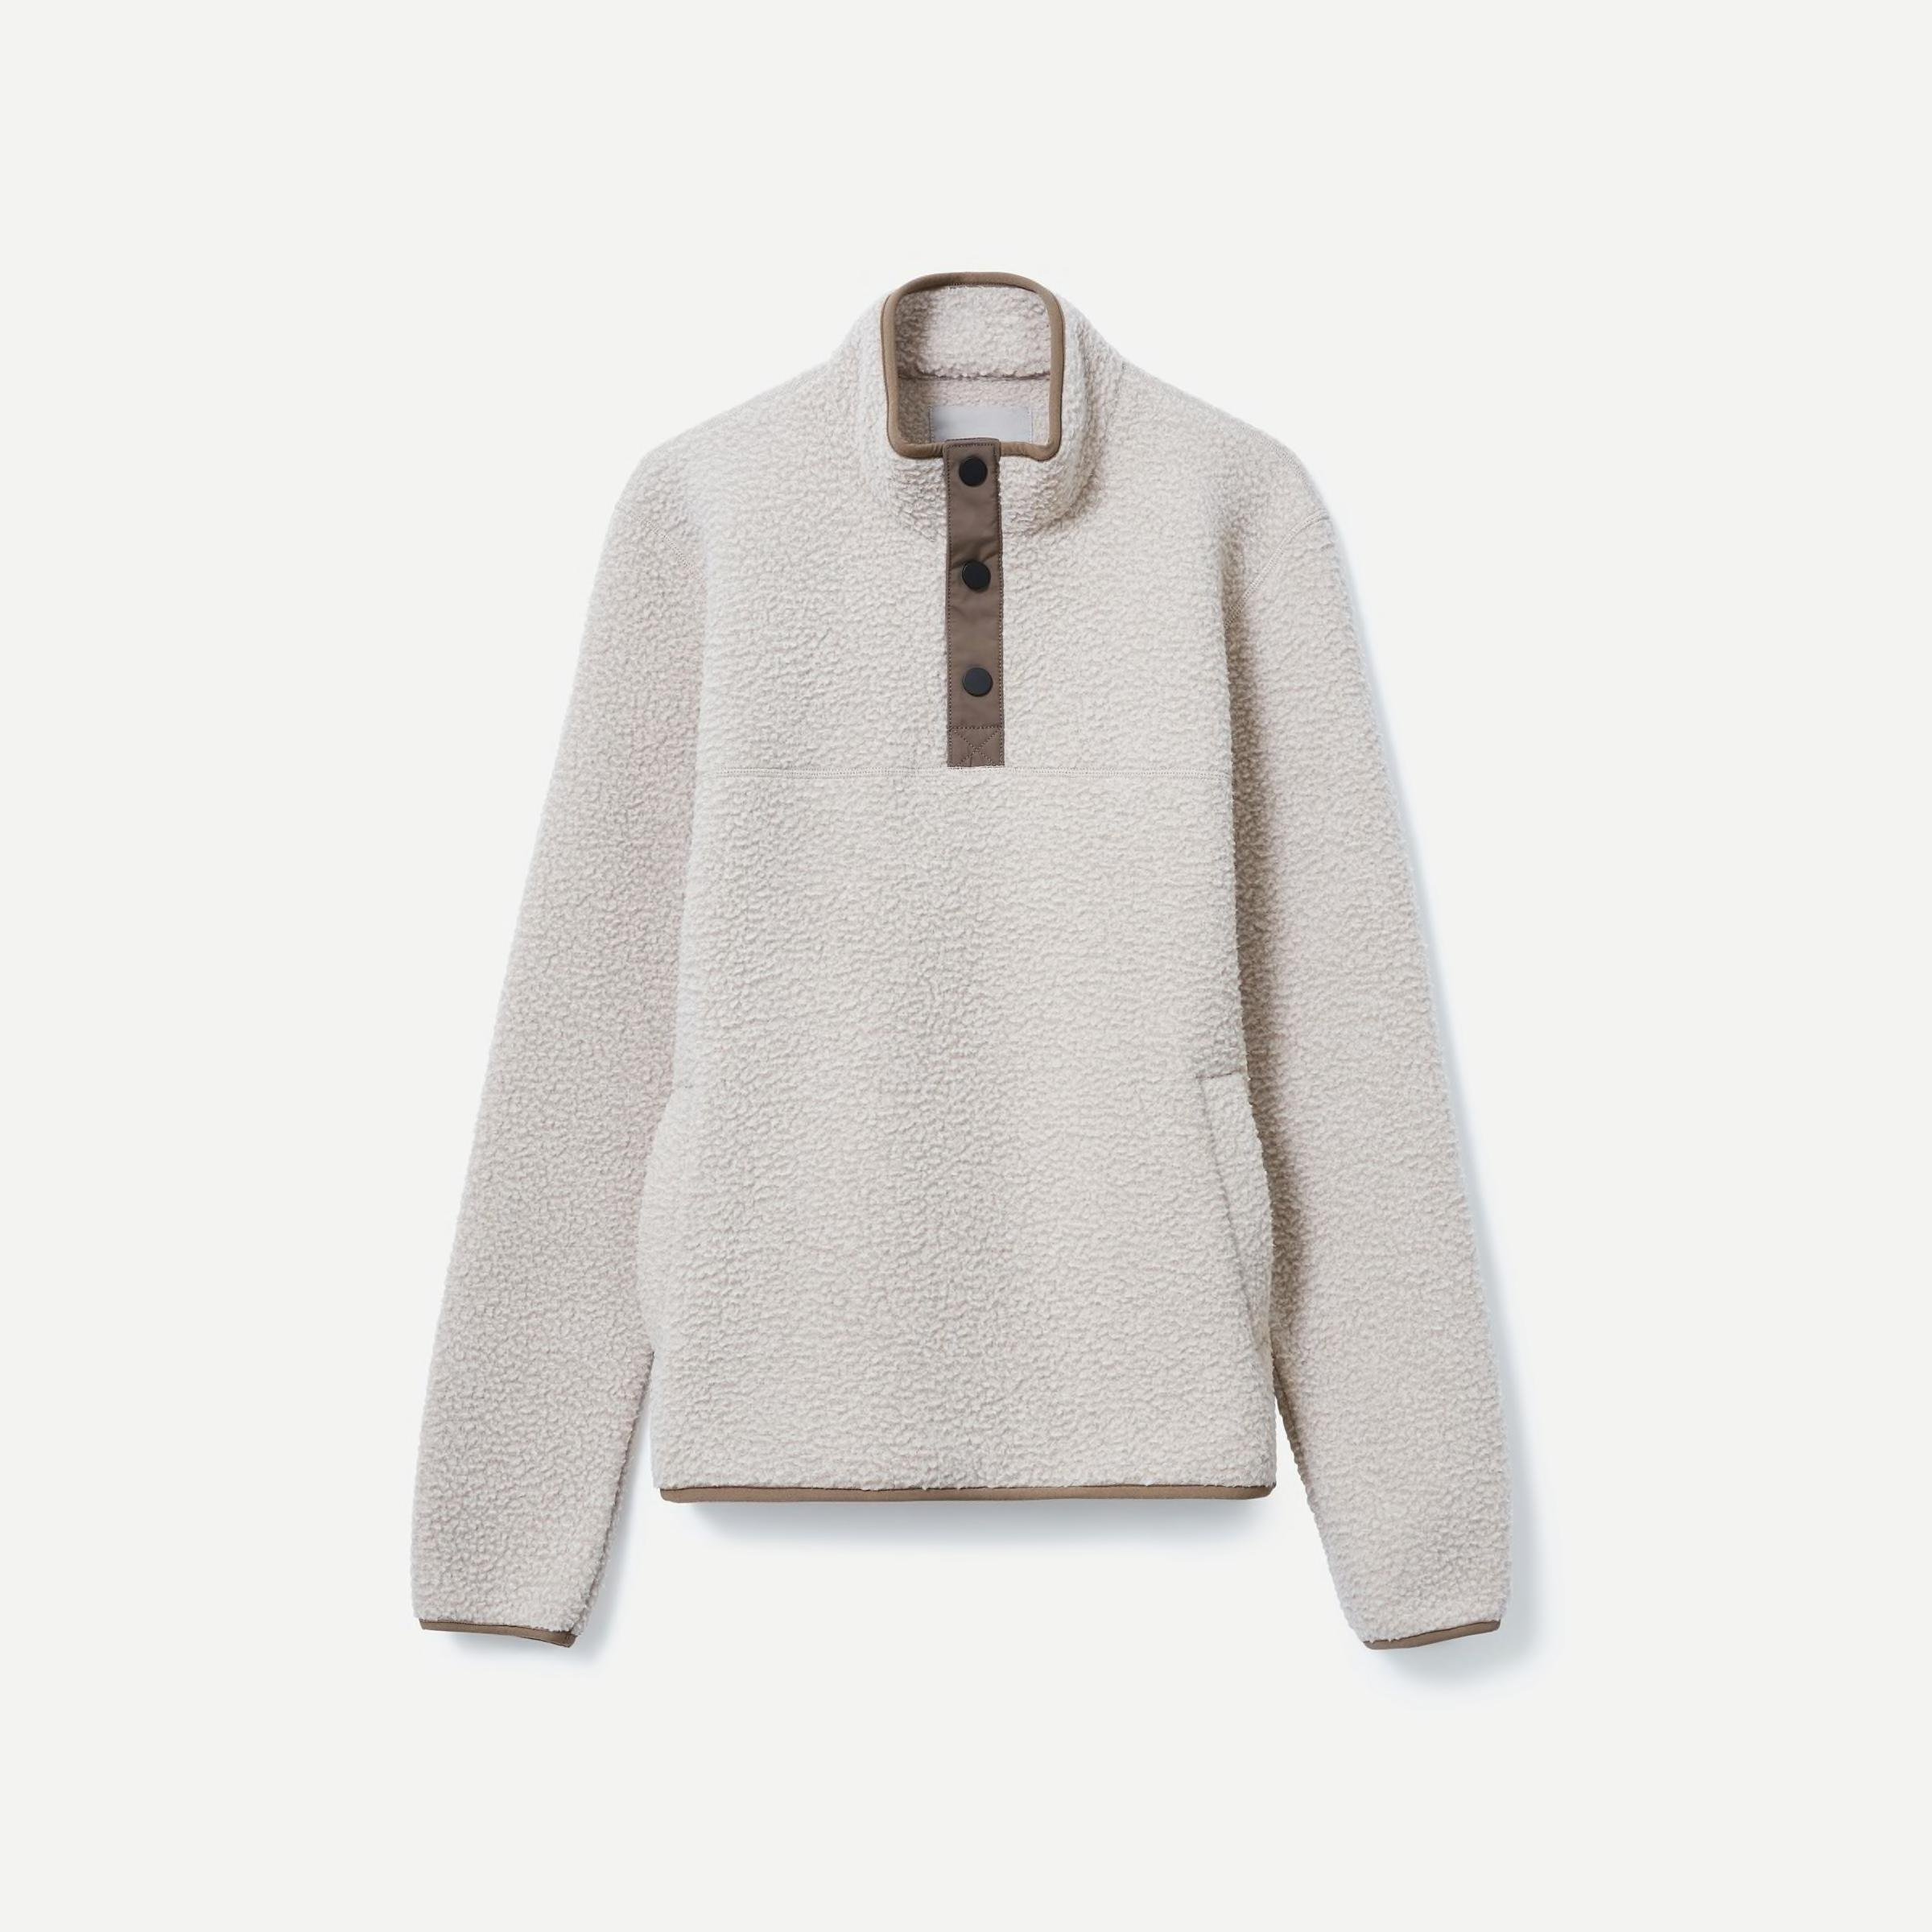 The ReNew Fleece Pullover by EVERLANE